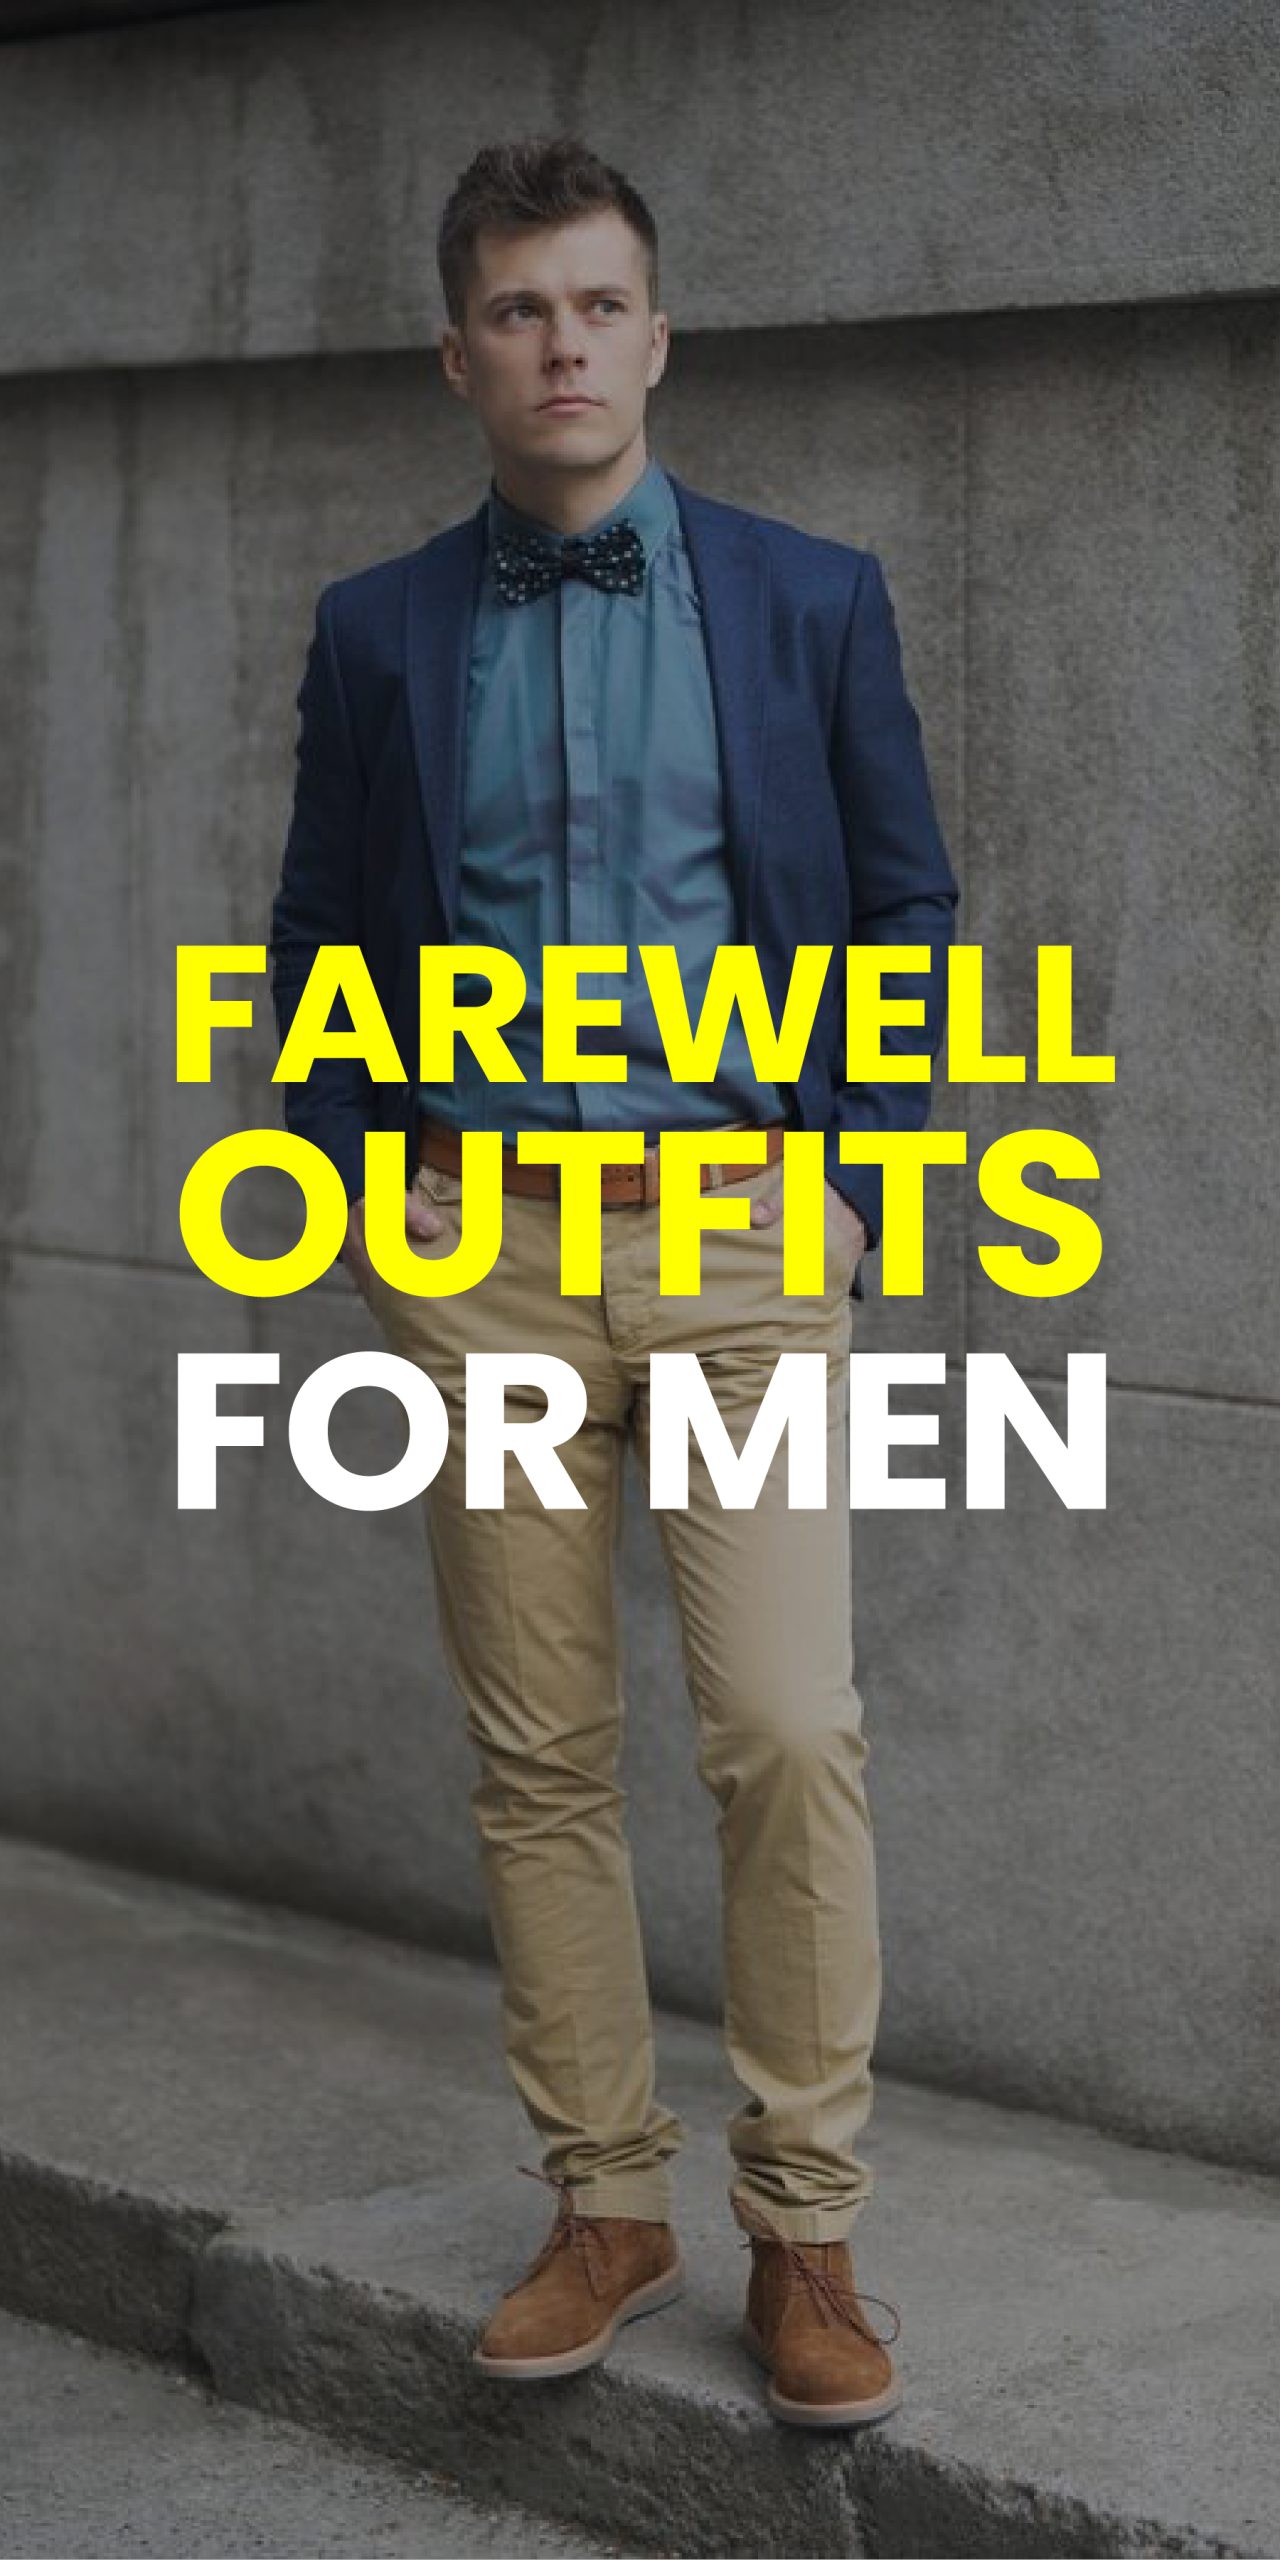 FAREWELL OUTFITS FOR MEN